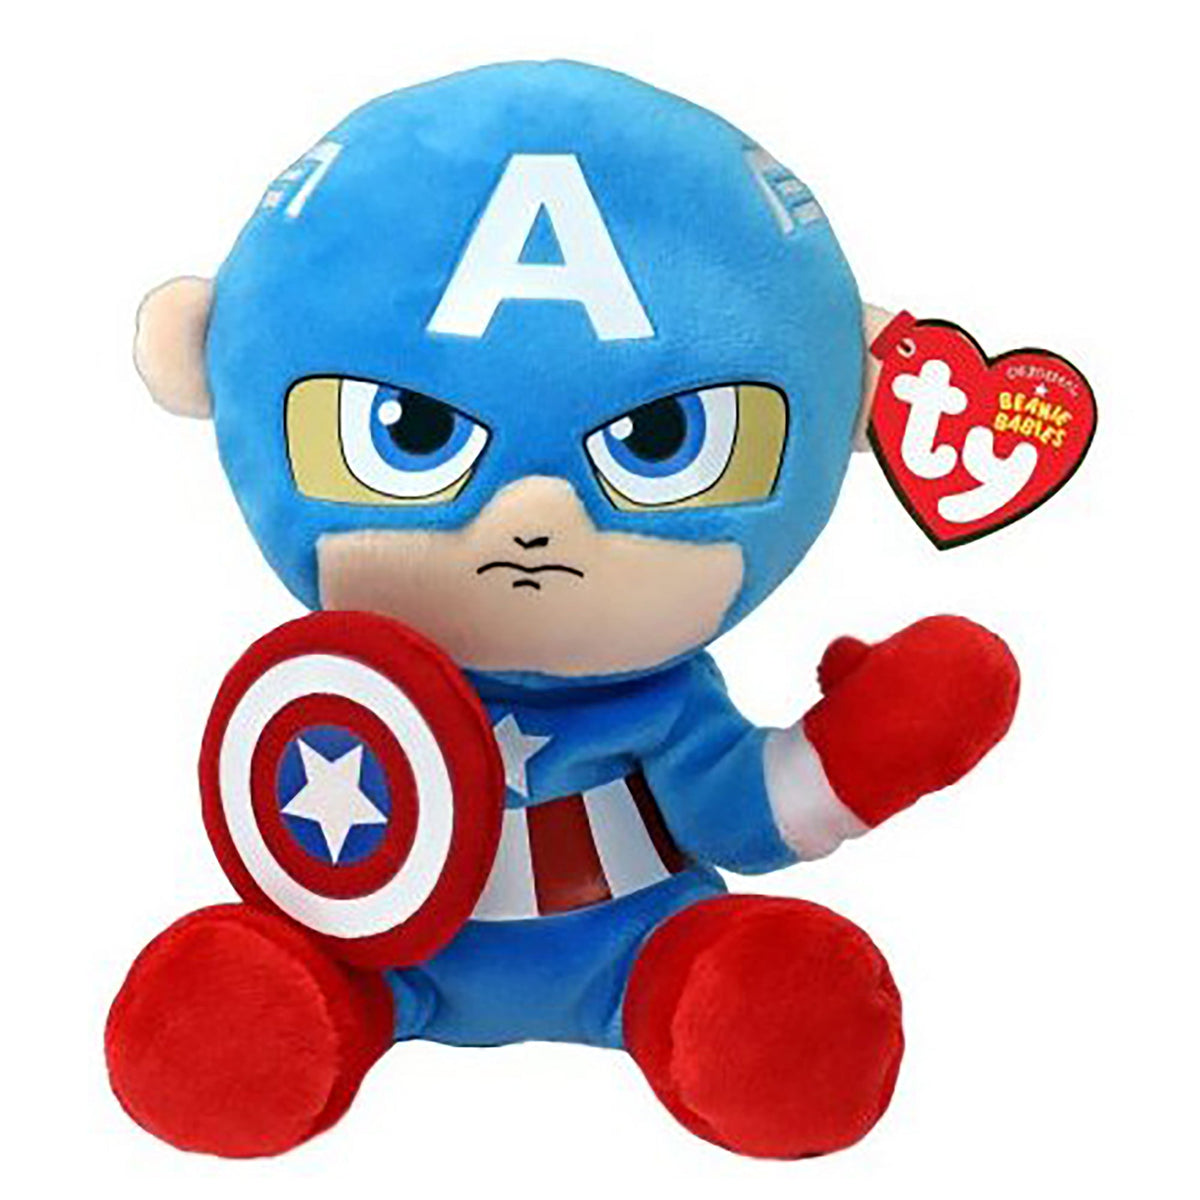 TY INC Plushes TY Marvel Soft Plush, Captain America, 8 Inches, 1 Count 008421440023